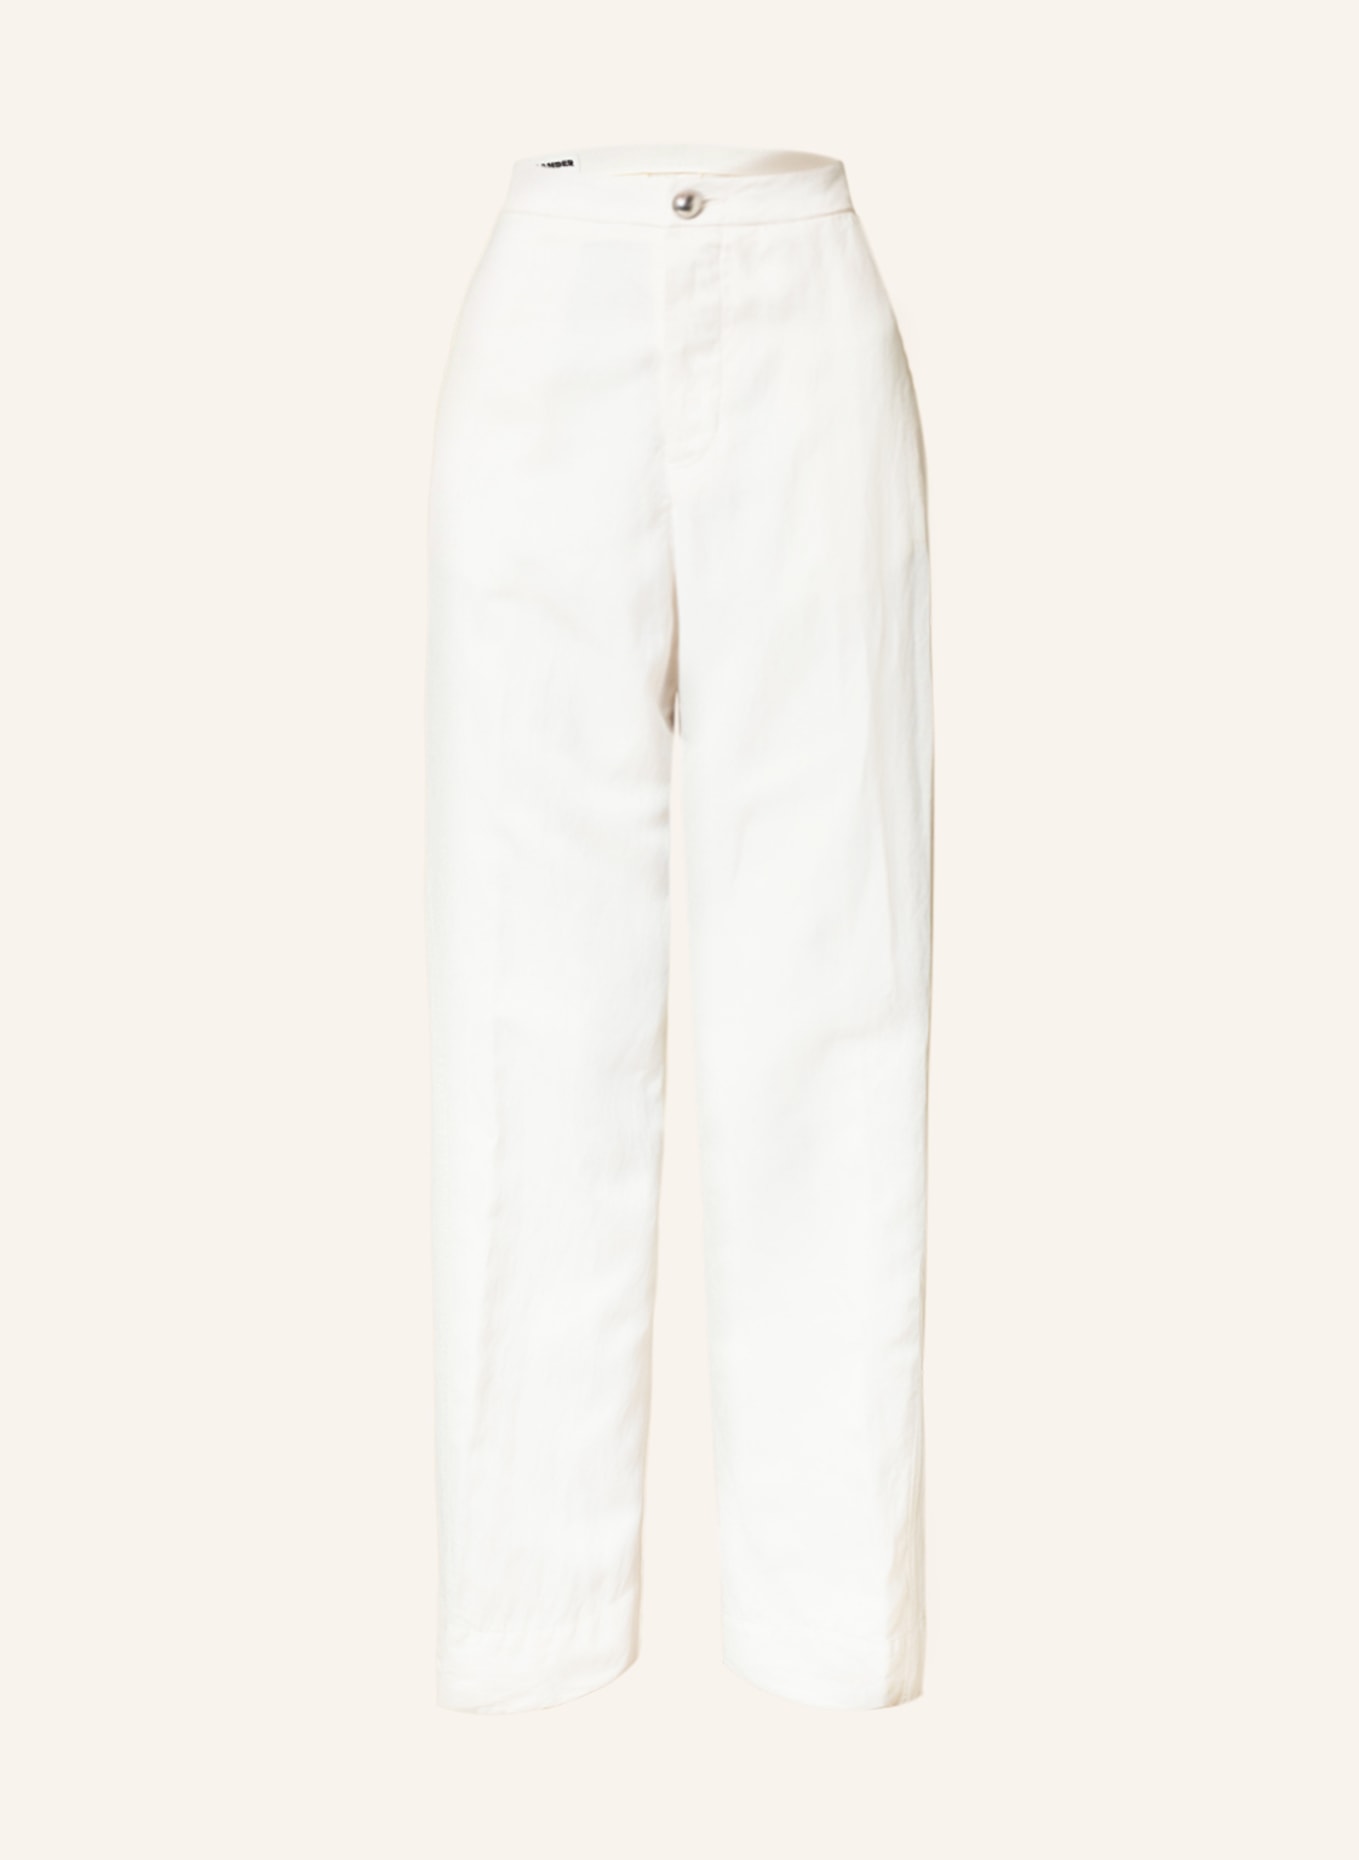 JIL SANDER Trousers with linen in white